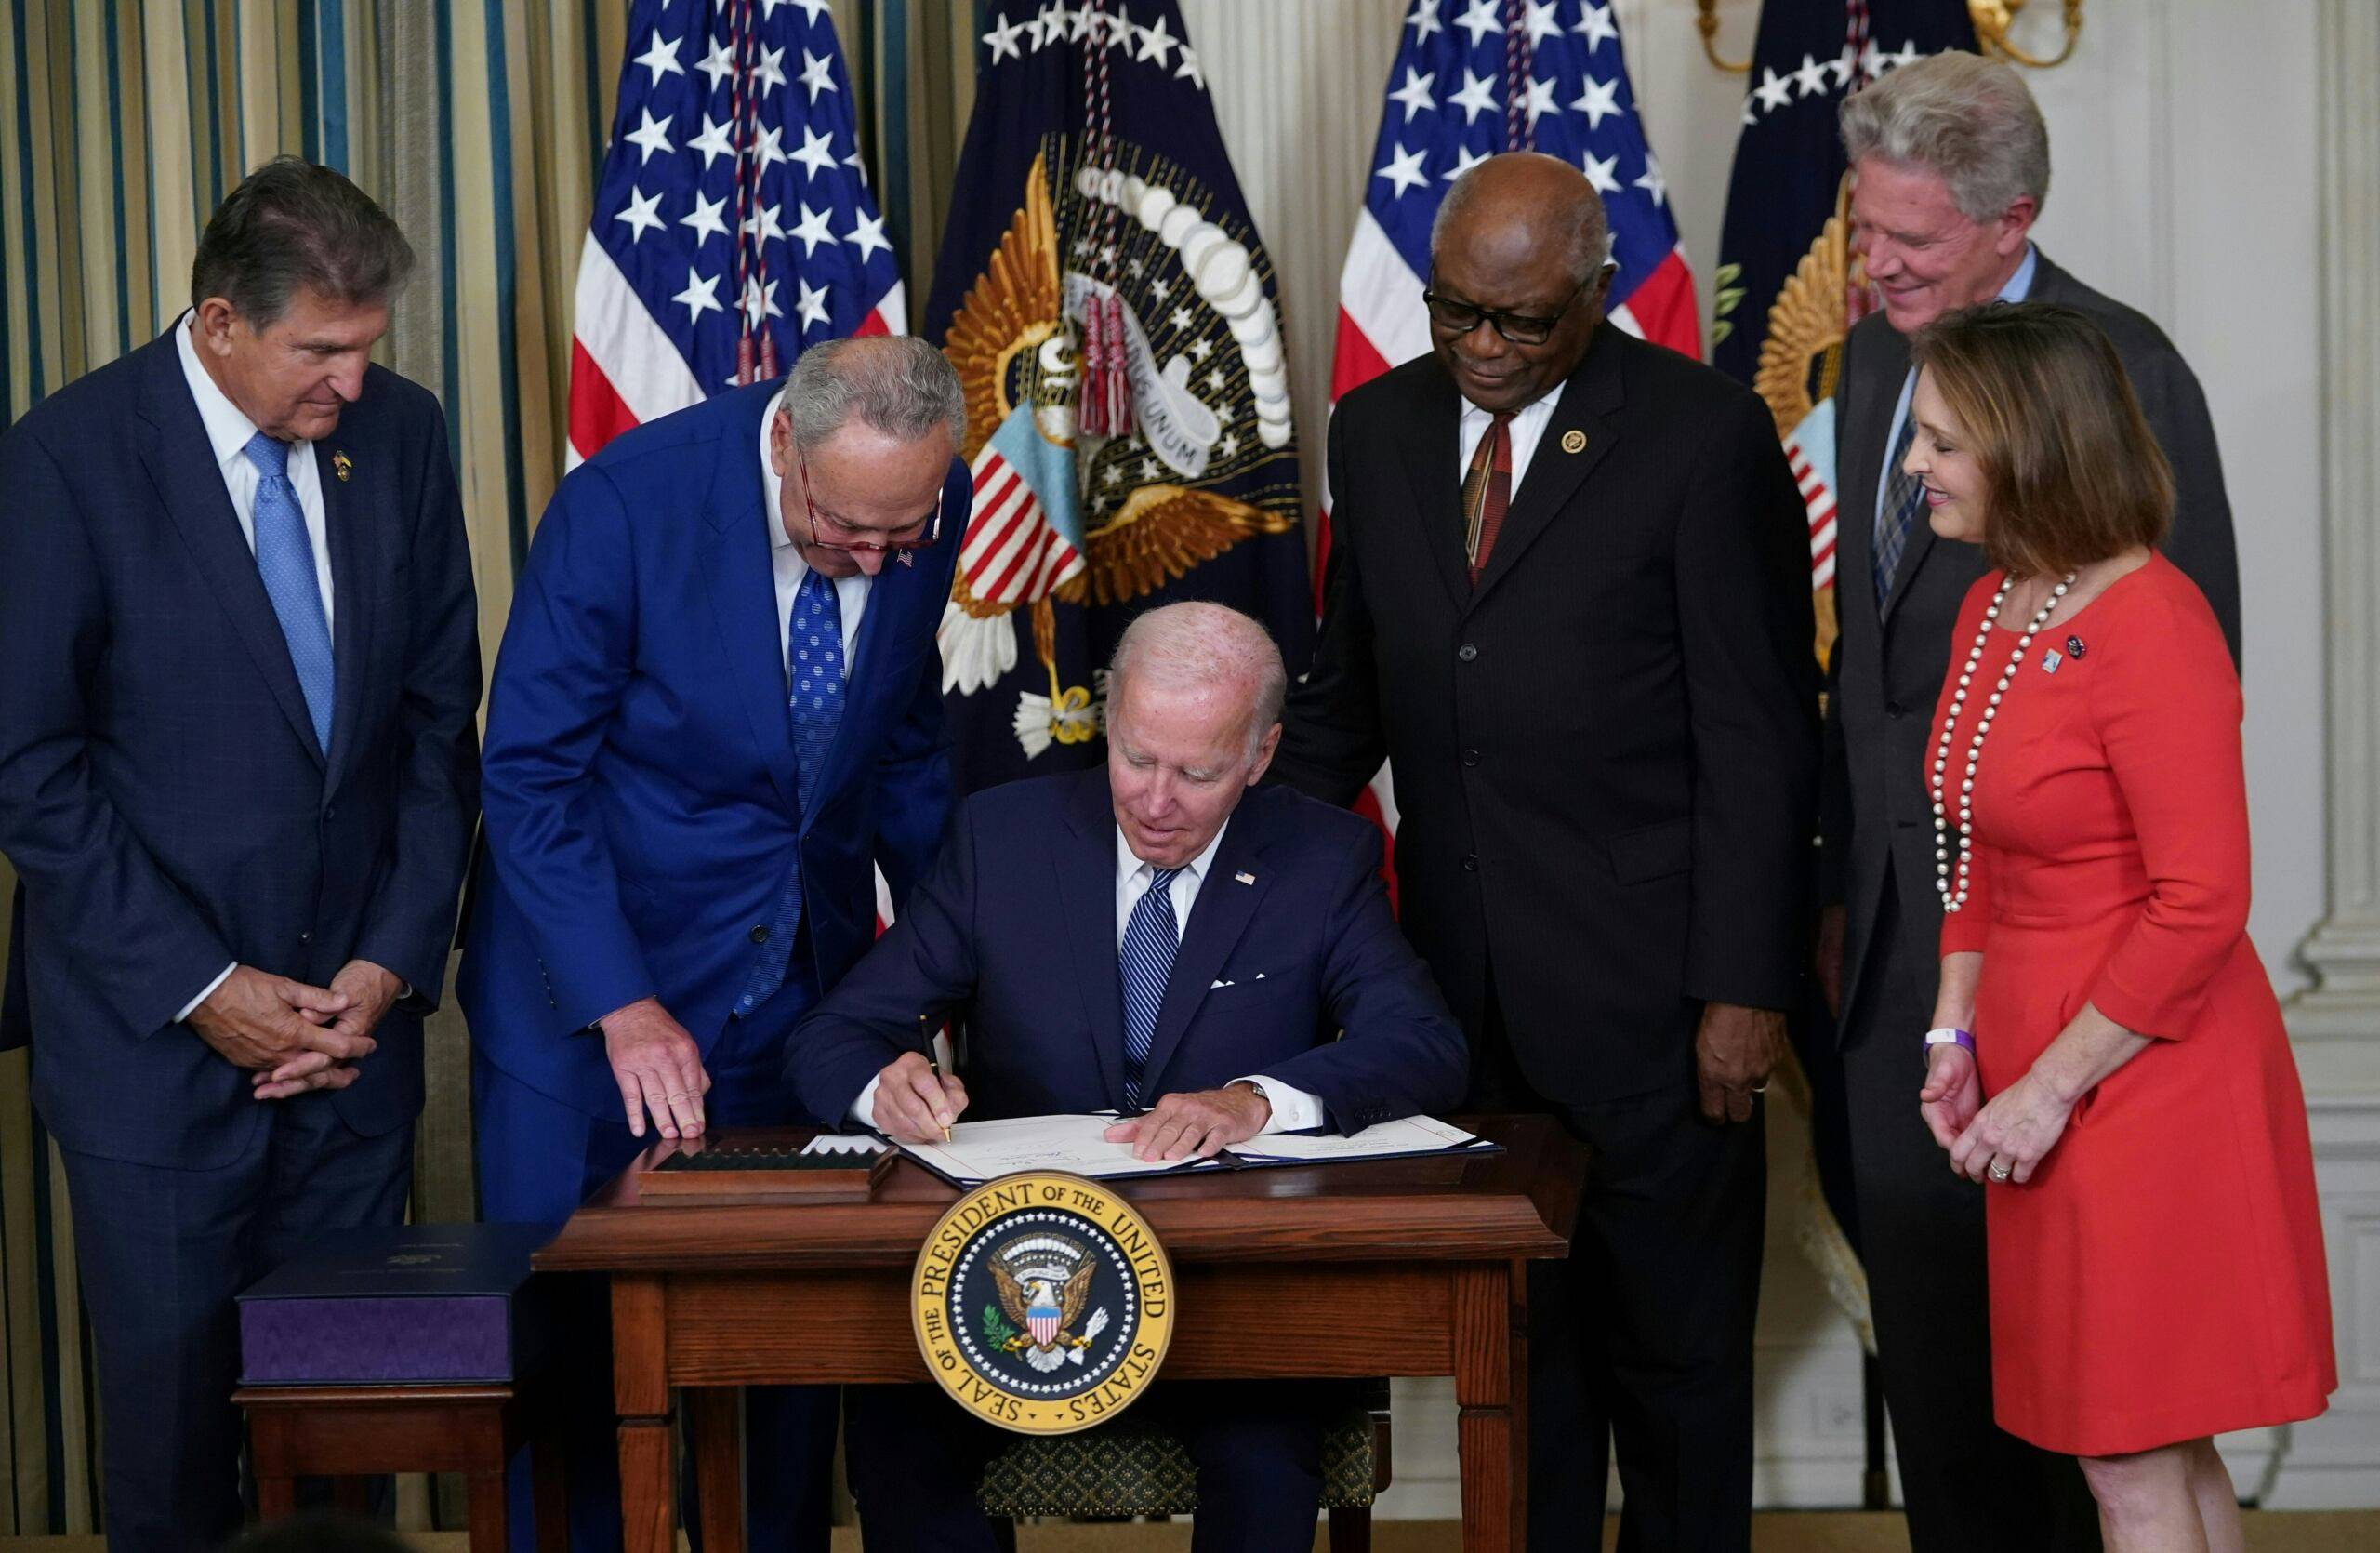 US President Joe Biden signs the Inflation Reduction Act of 2022 into law during a ceremony in the State Dining Room of the White House in Washington, DC, on August 16, 2022. - President Joe Biden on Tuesday signed into law a big climate change and health care spending bill, giving Democrats another boost ahead of midterm elections in which Republicans are suddenly less certain of a predicted crushing victory. (Photo by MANDEL NGAN / AFP)